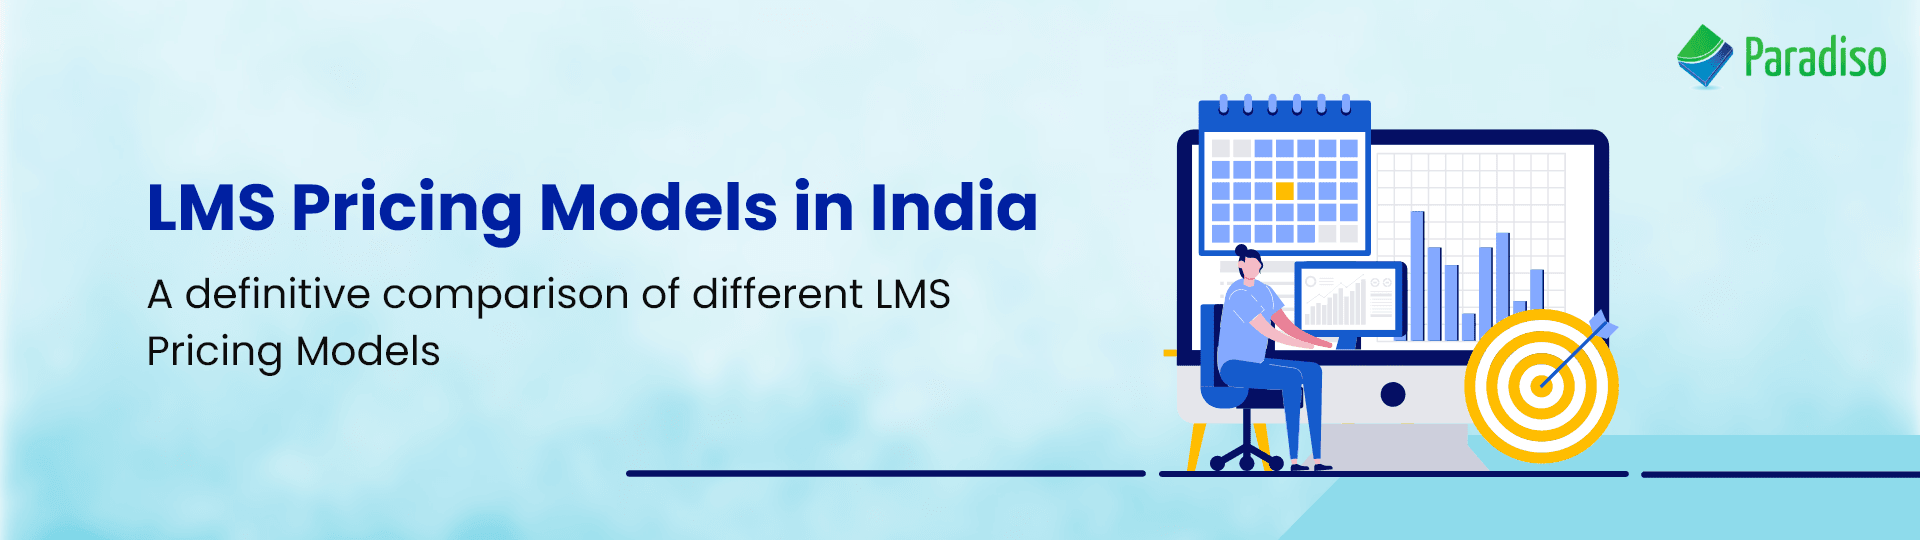 LMS Pricing Models in India